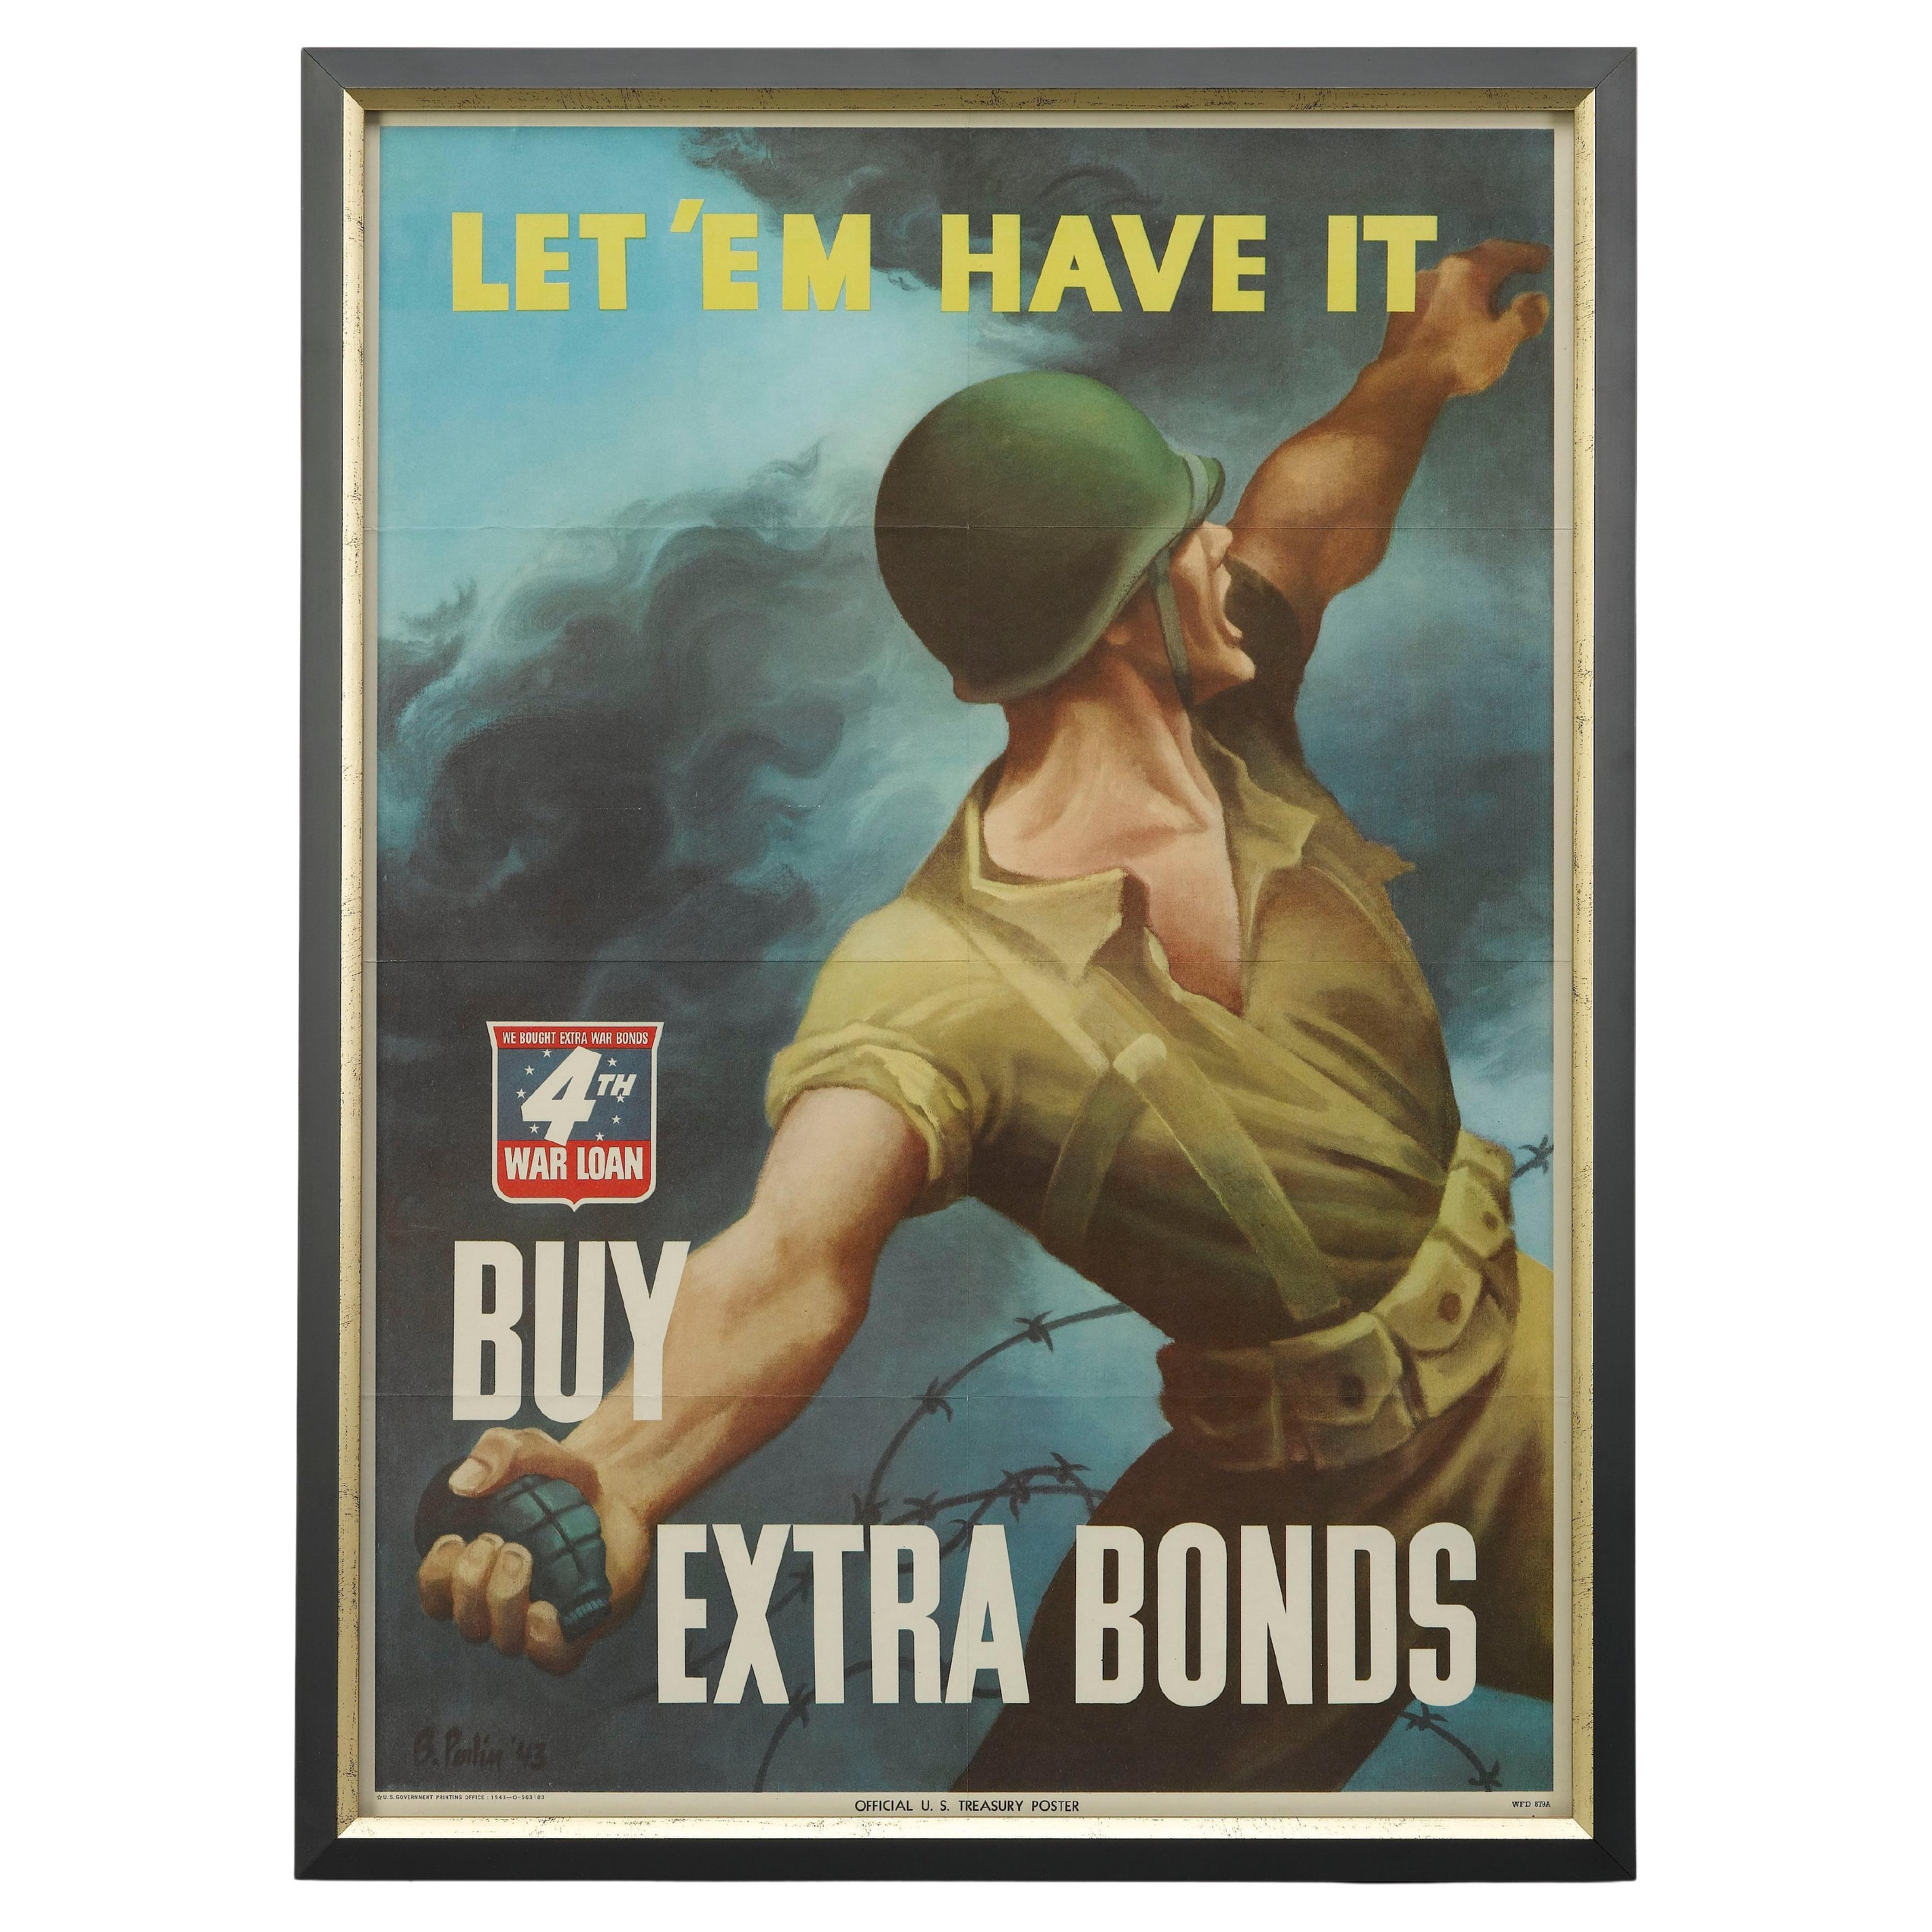 How many propaganda posters were made during World War II?